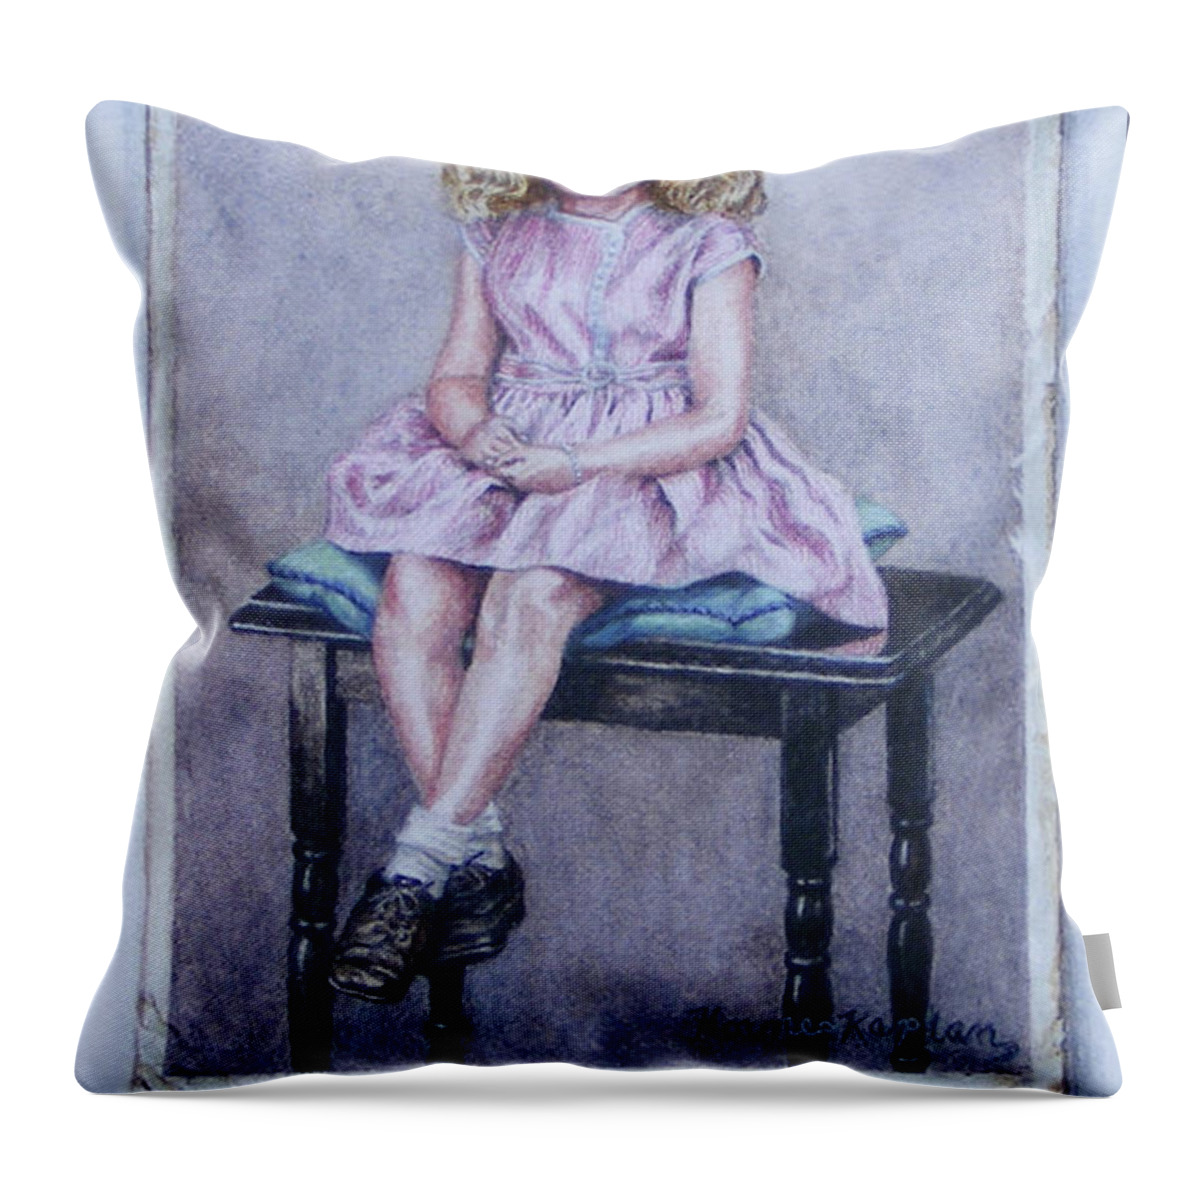 Antique Photo Throw Pillow featuring the painting Missing Daddy, Devonshire 1940 by Denise Horne-Kaplan